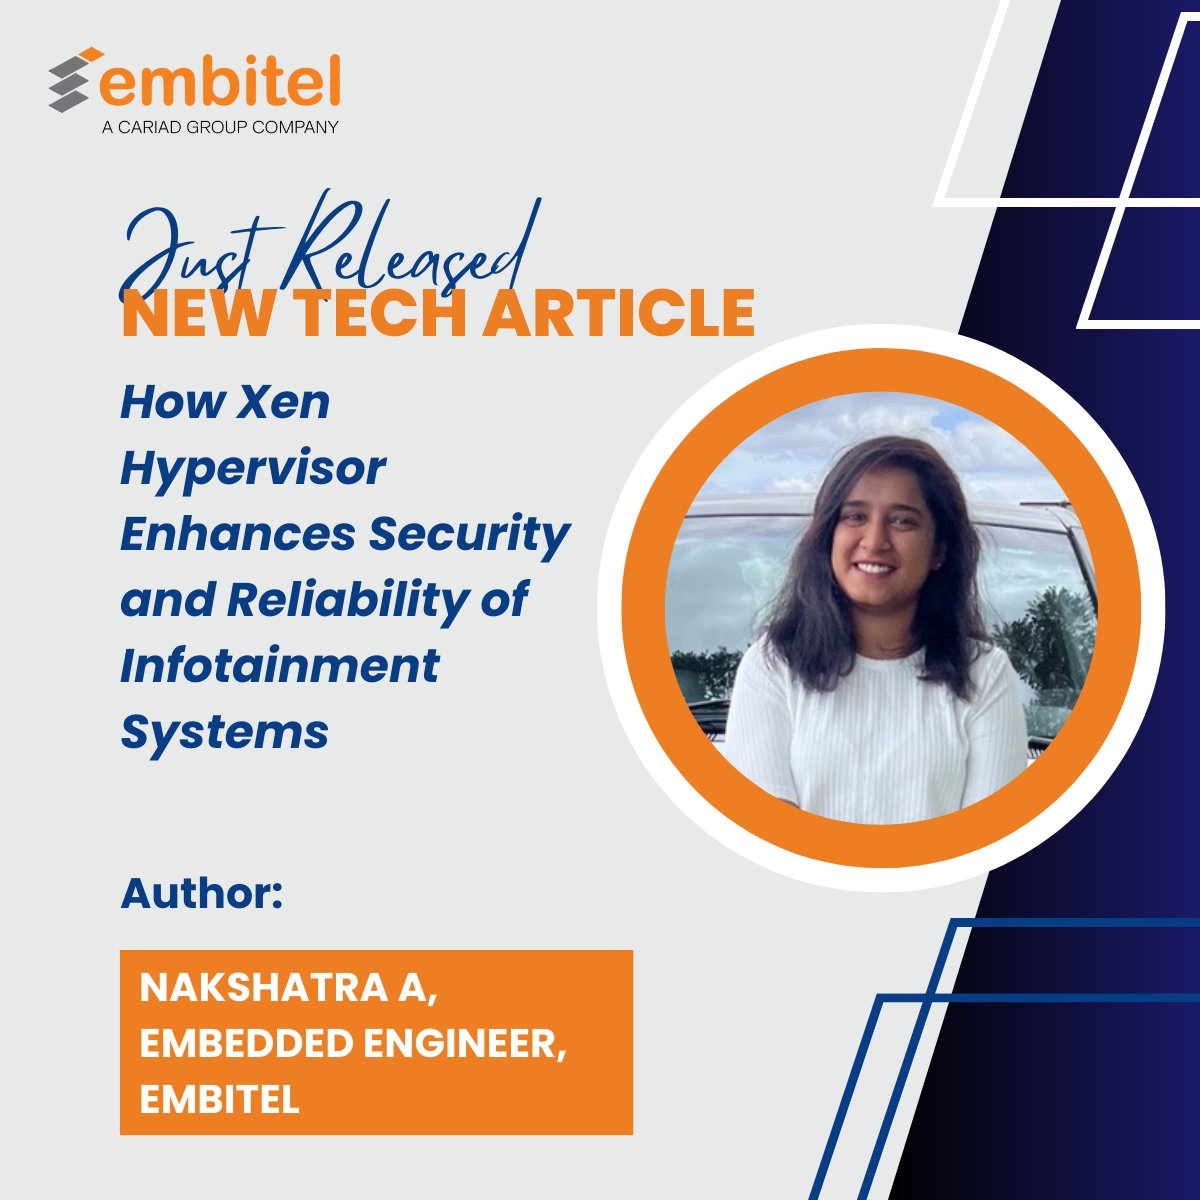 #Automotive #infotainment systems are becoming increasingly sophisticated, leading to security issues. See how #Xen #hypervisor can be used to isolate software components in #VirtualMachines, preventing vulnerabilities & crashes in the system - embitel.com/blog/embedded-…